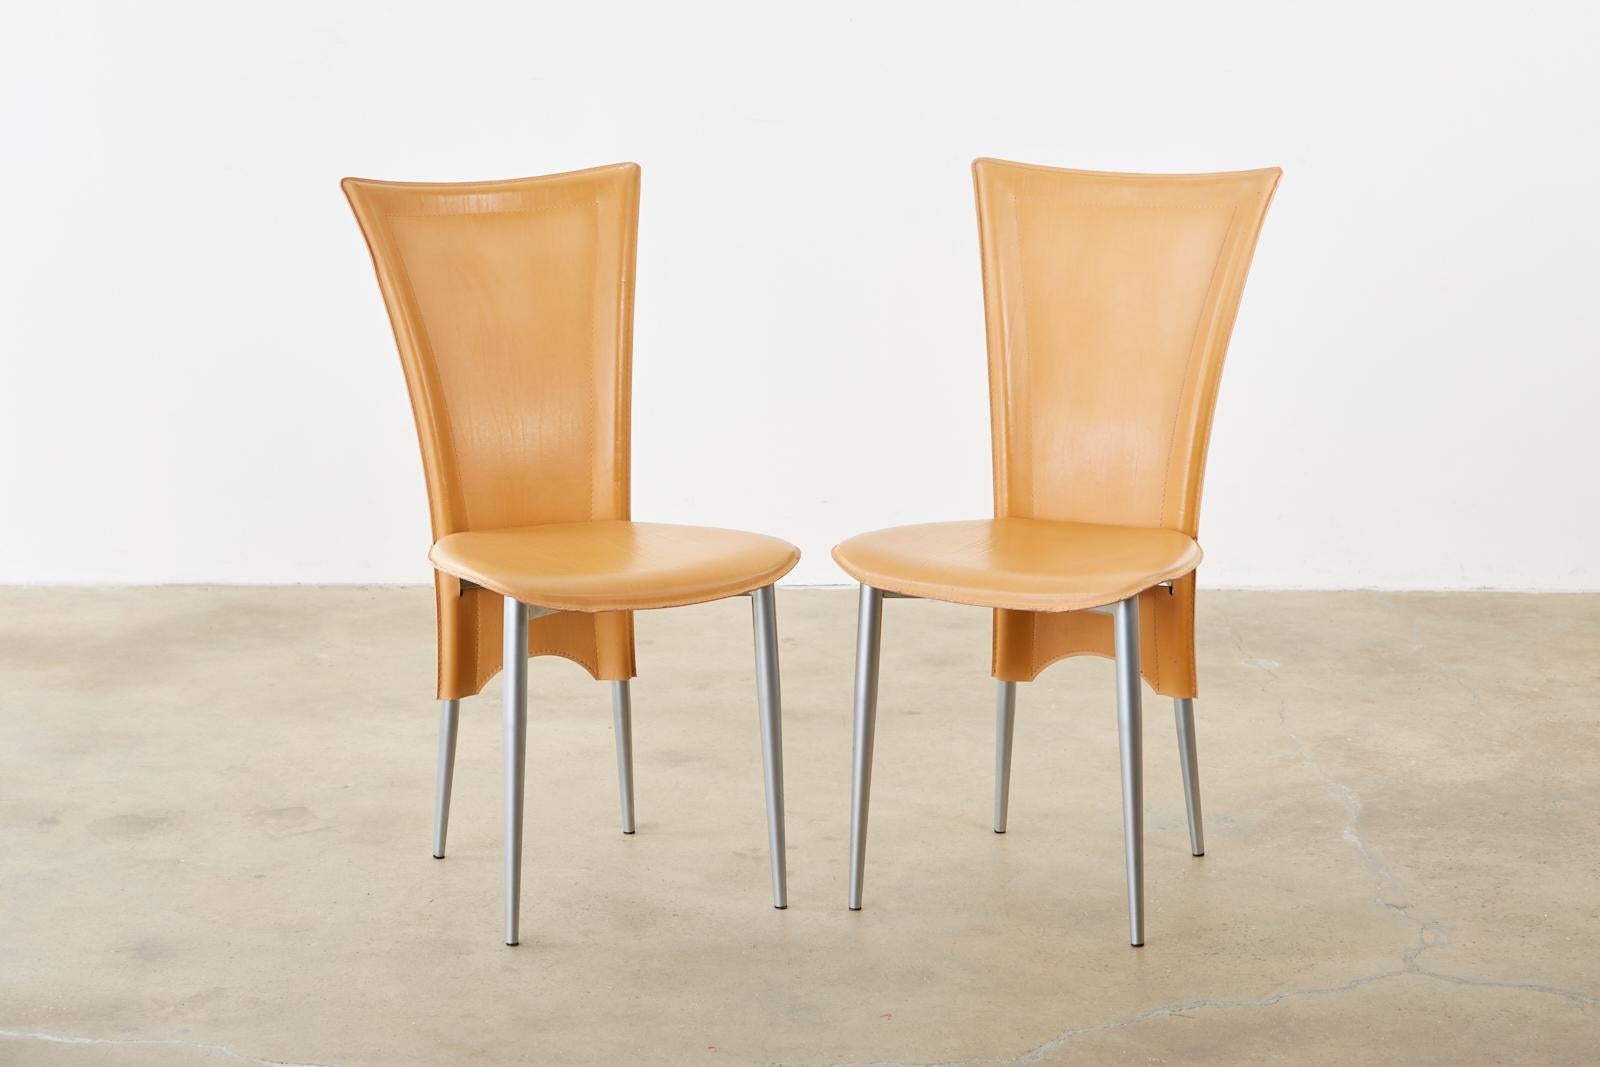 Distinctive set of twelve Italian dining chairs featuring a camel colored leather wrapped frame. Amazingly comfortable with an ergonomic design made in the modern style. Thick leather formed surfaces bordered with light stitches. Each metal frame